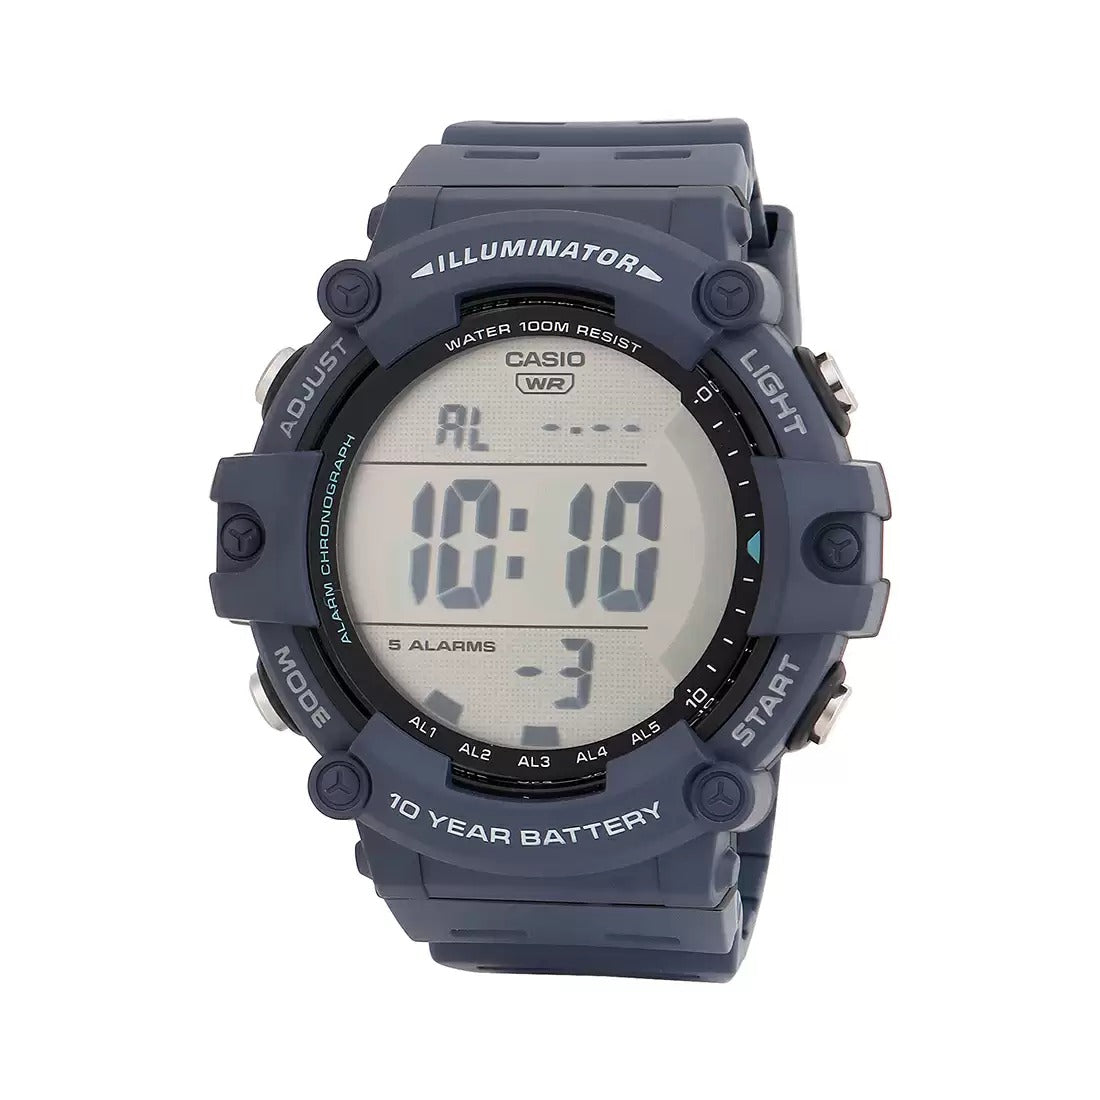 Casio Water Resistance Men's Watch D319 AE-1500WH-2AVDF